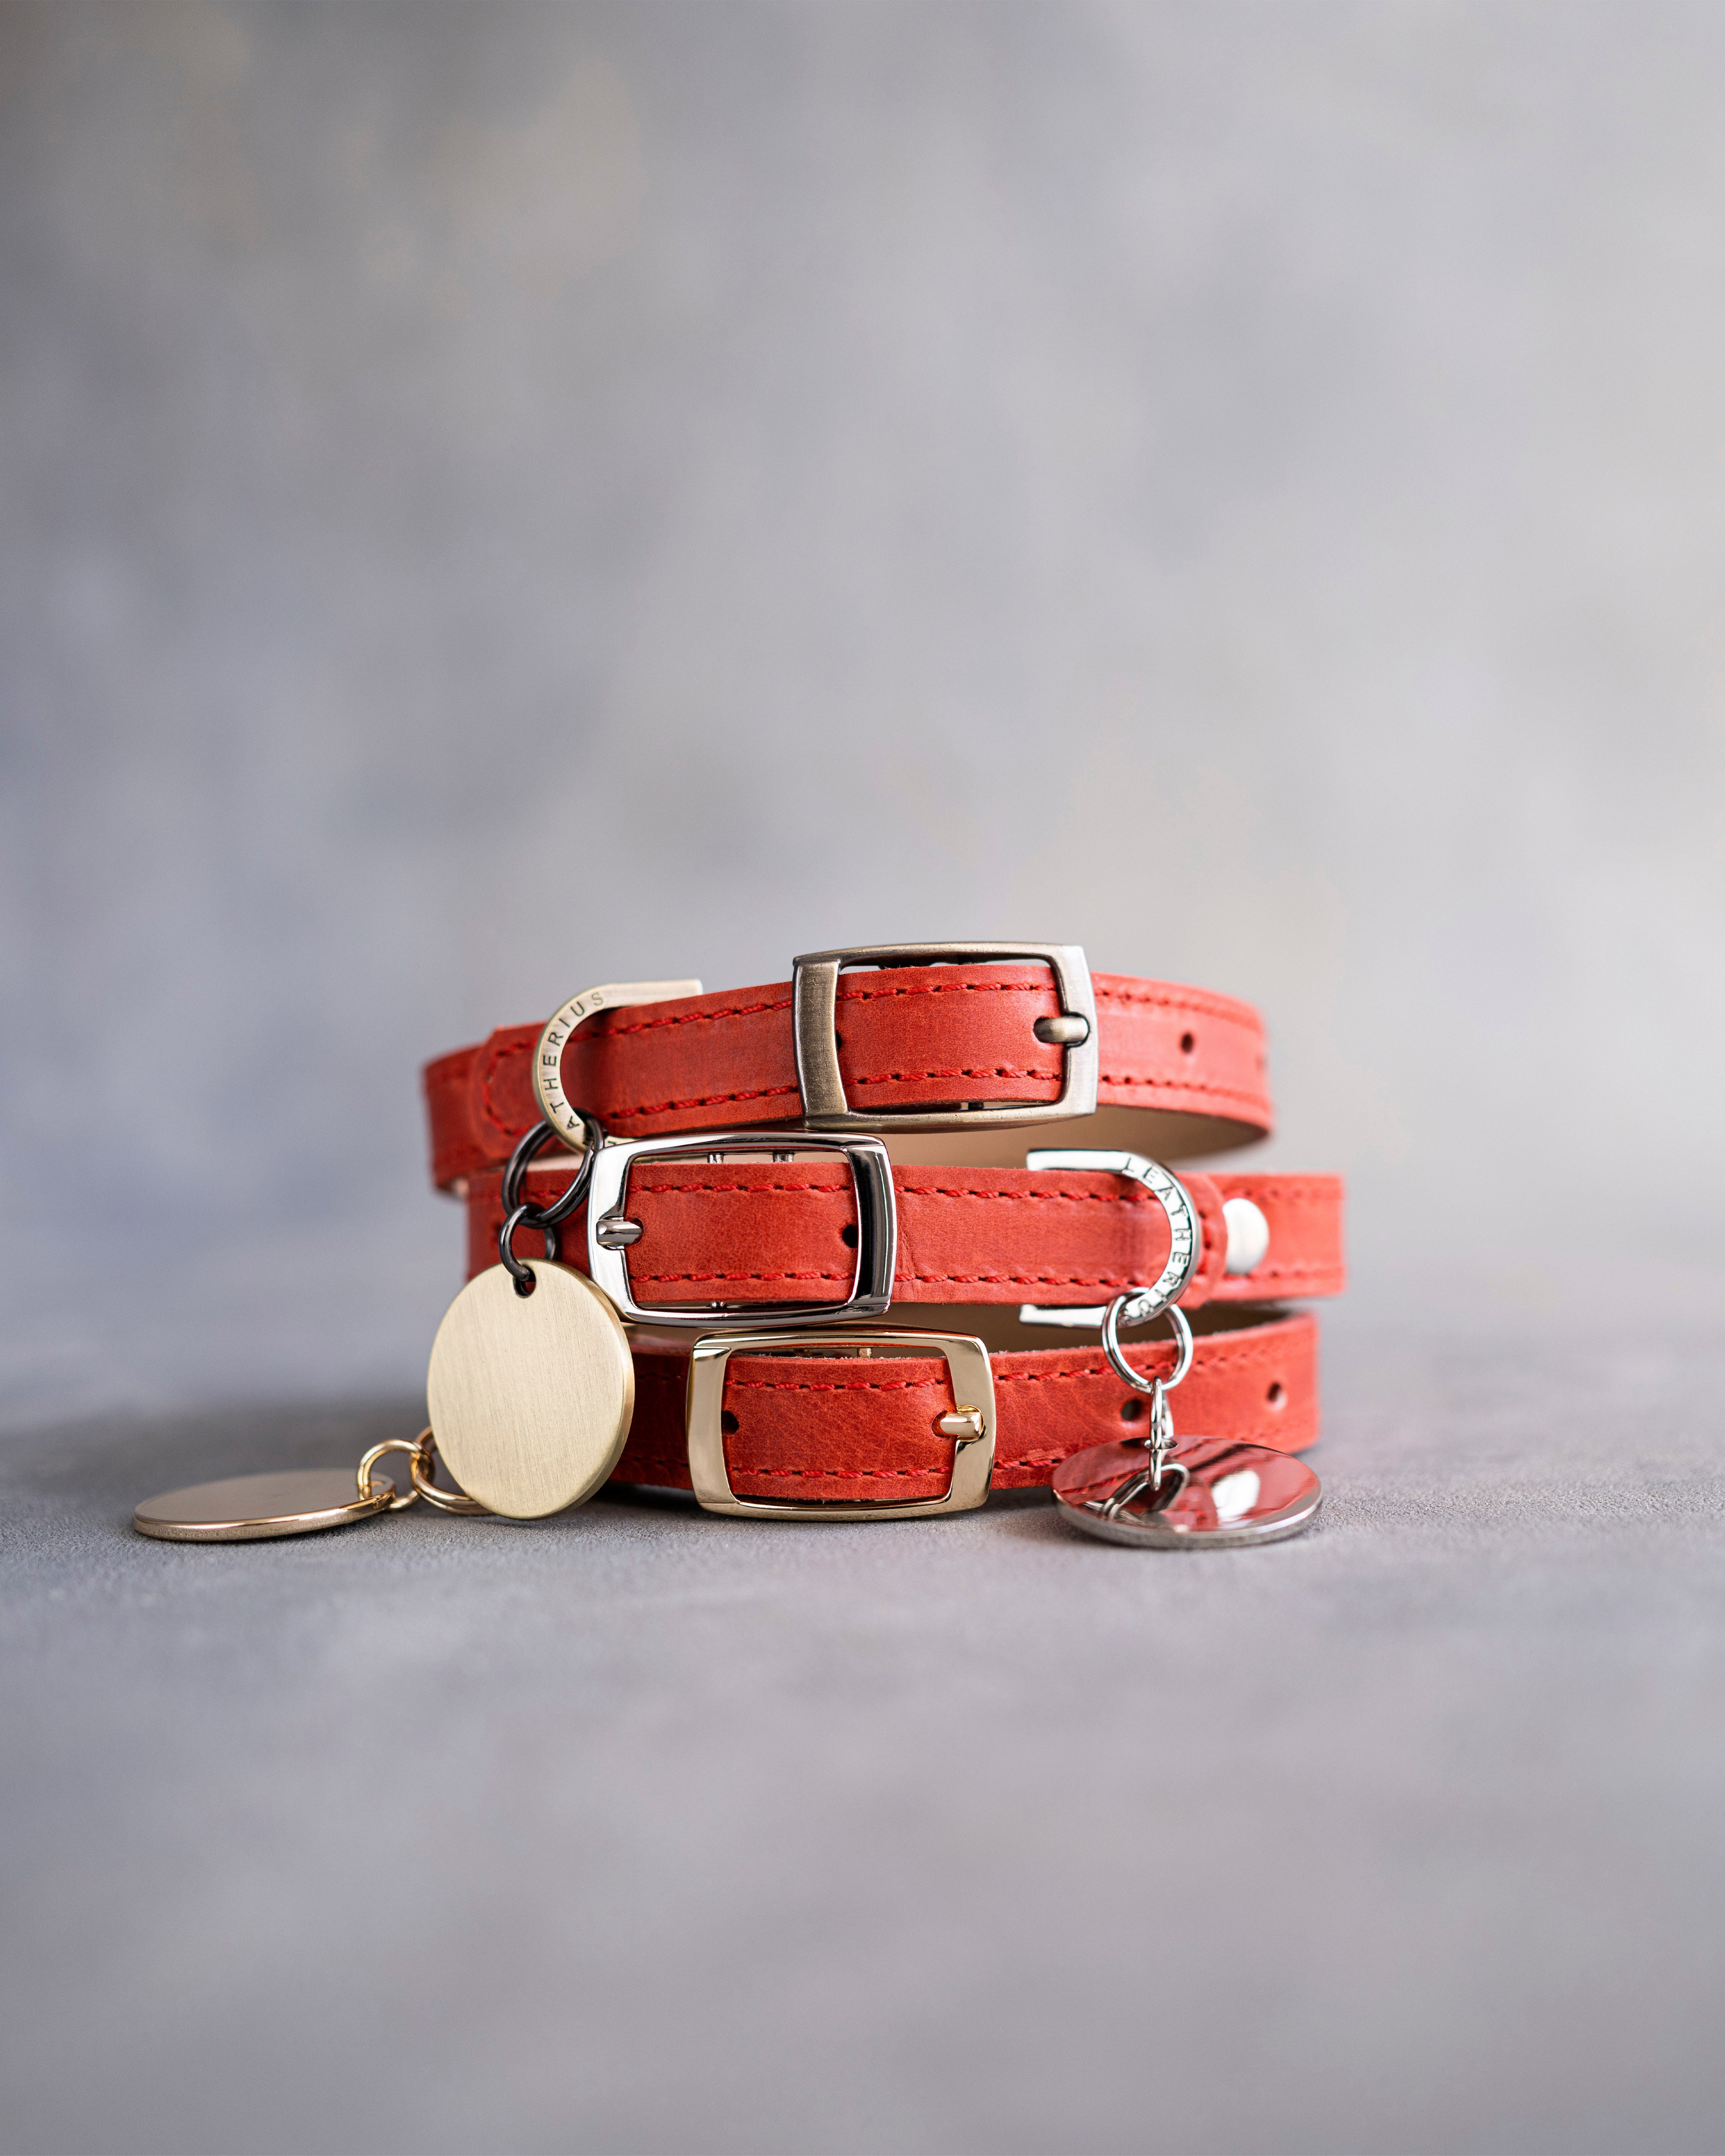 Dog Collar in Poppy Red leather with classy pin buckle